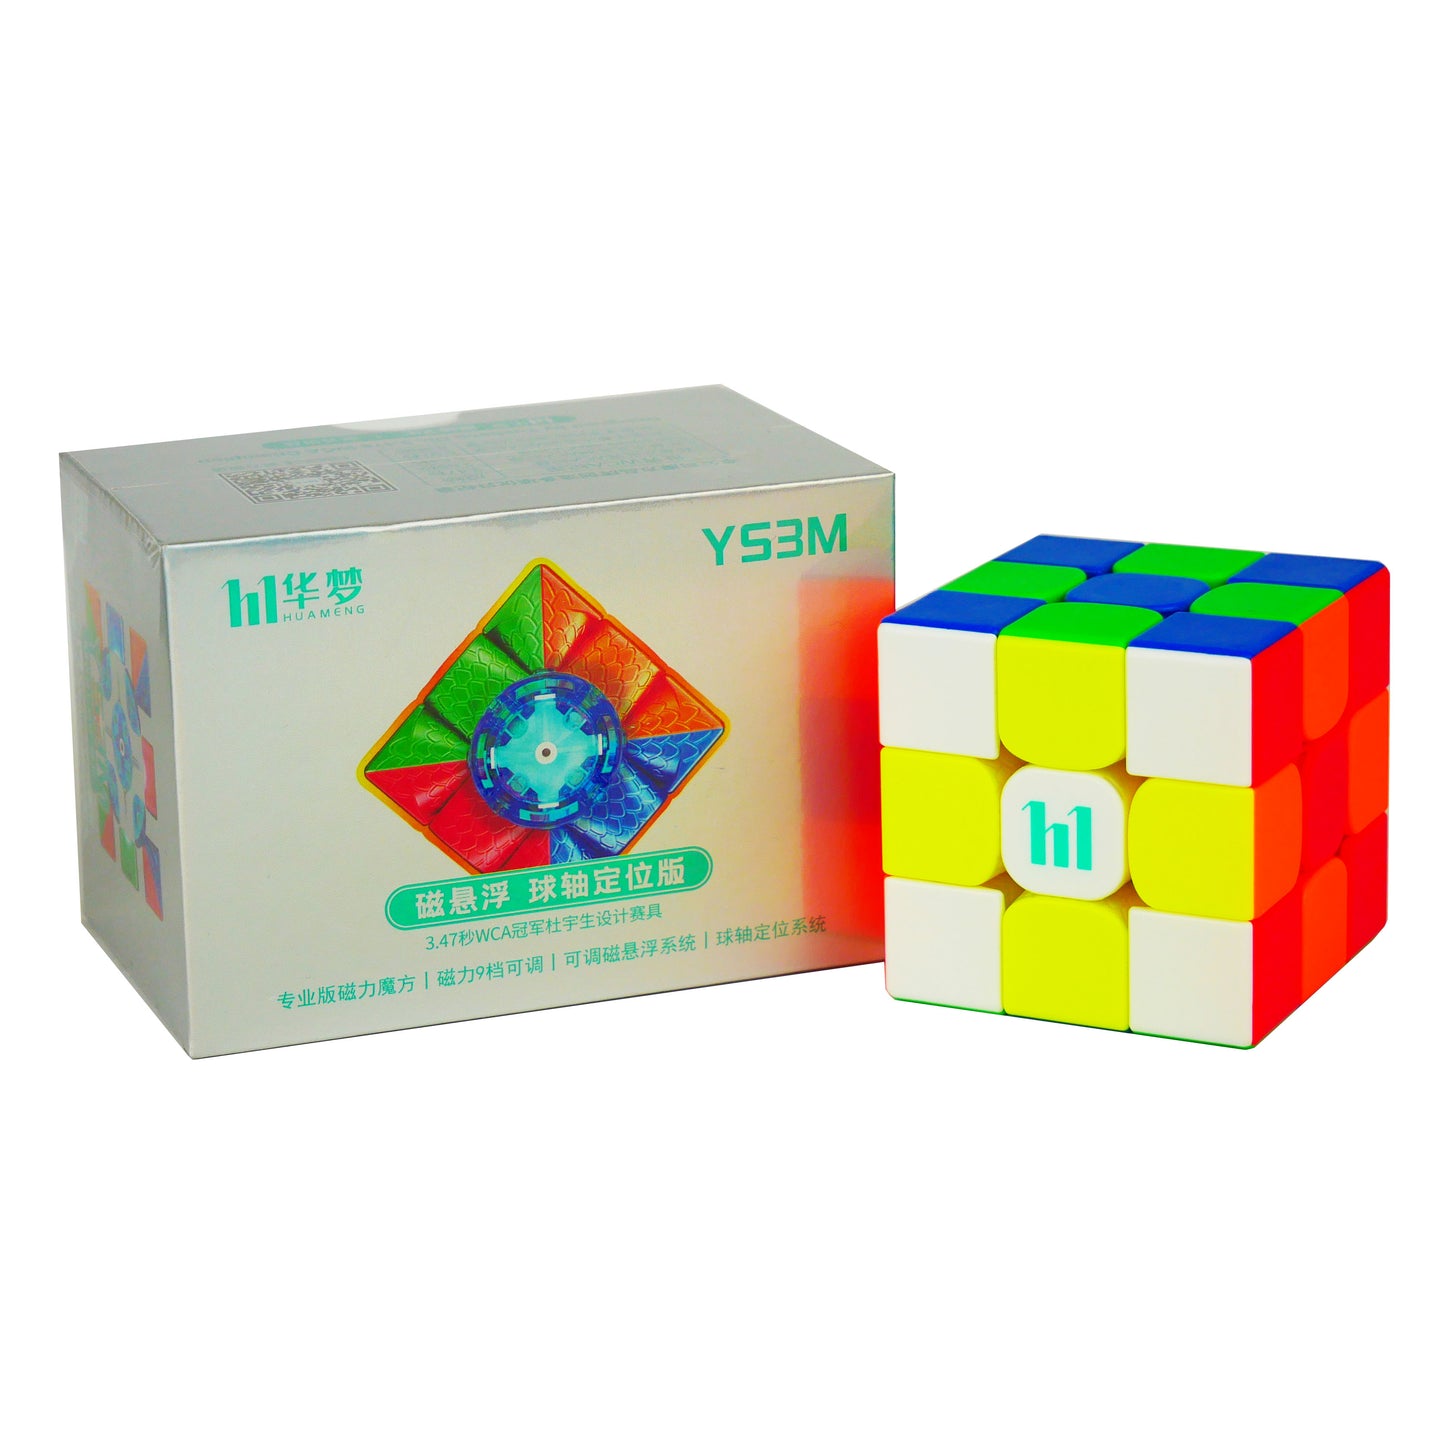 HuMeng YS3M 3x3 Ball-Core (Magnetic Core + Maglev)